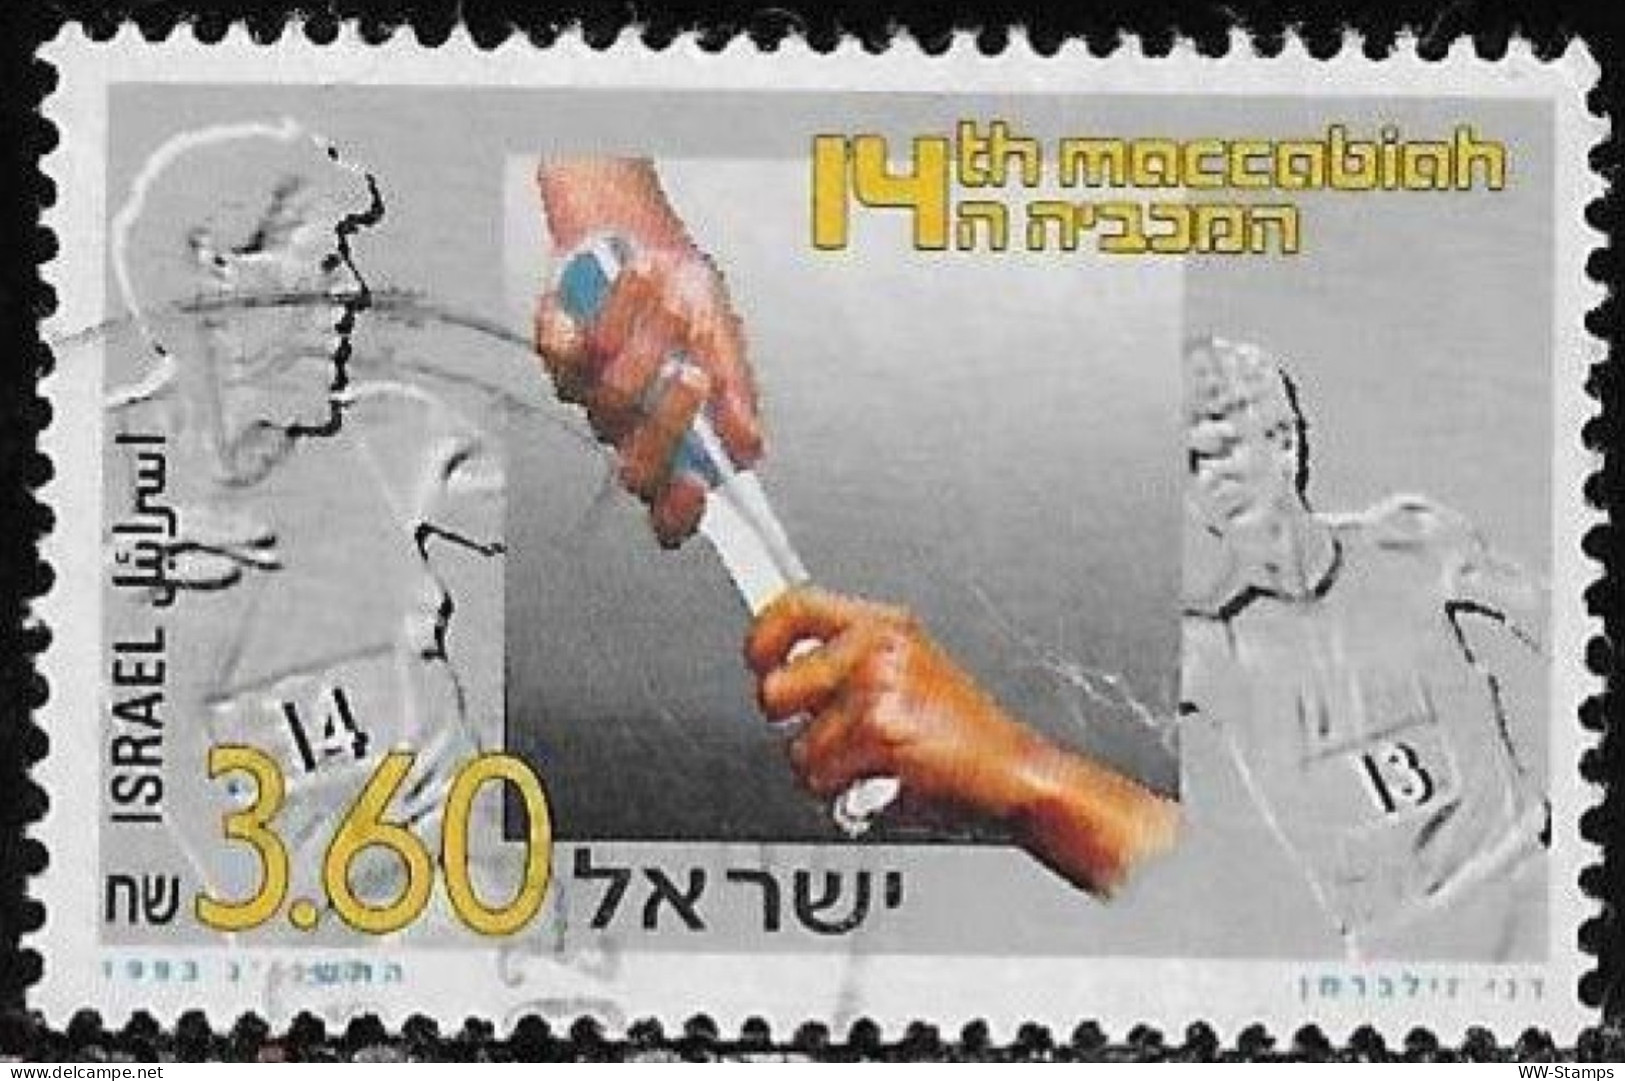 Israel 1993 Used Stamp The 14th Maccabiah Sports Games [INLT10] - Oblitérés (sans Tabs)